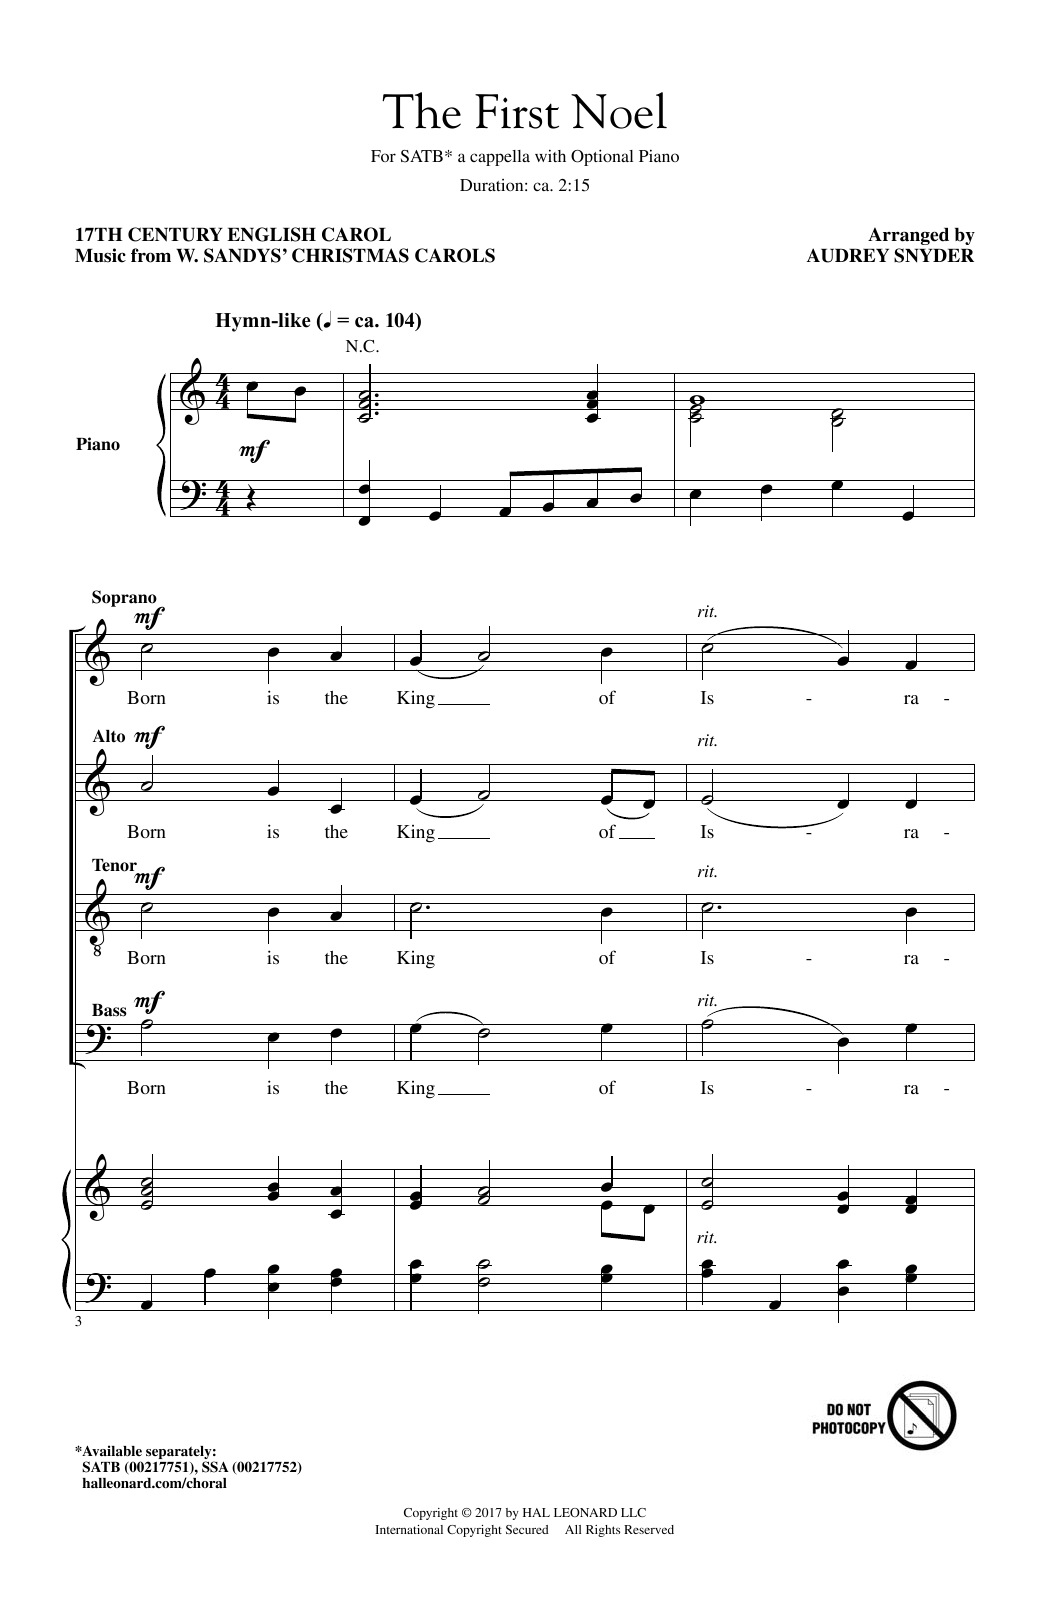 Download Audrey Snyder The First Noel Sheet Music